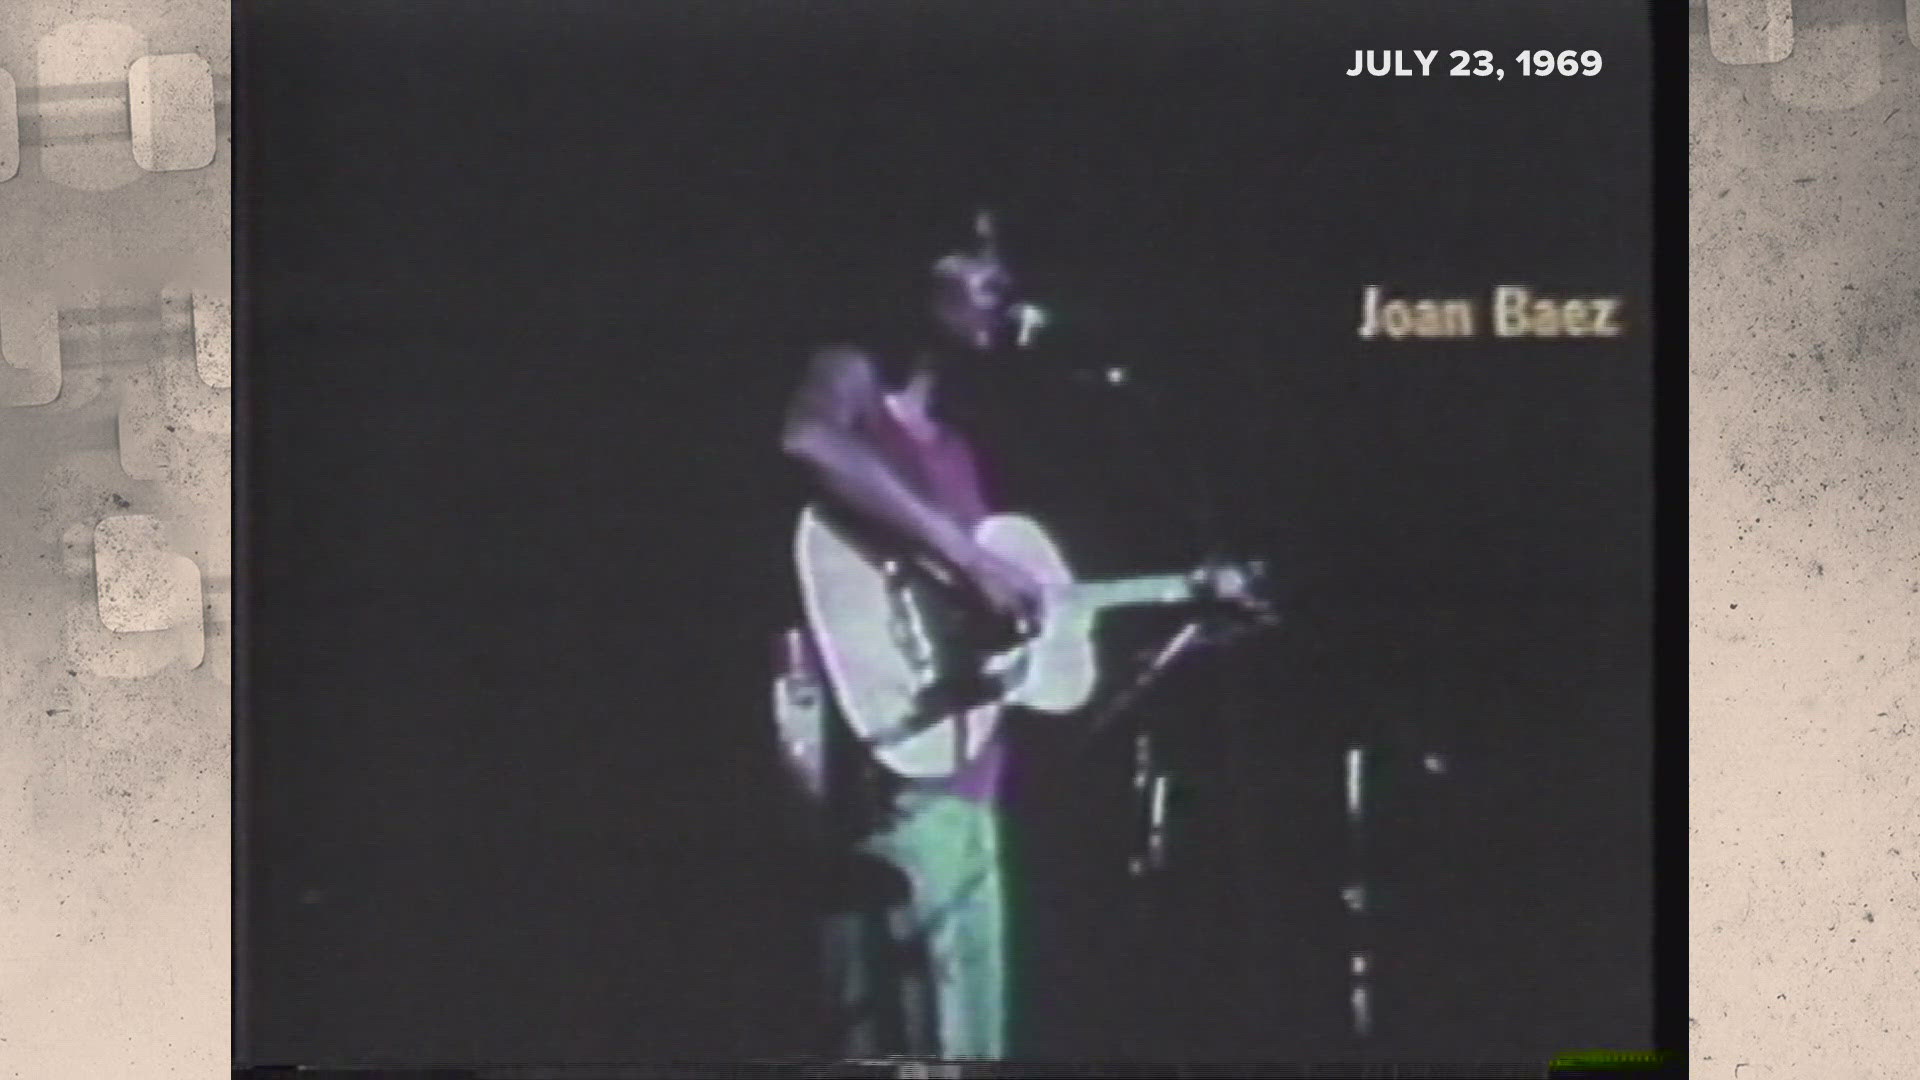 On July 23, 1969, the legendary singer and songwriter Joan Baez was in St. Louis to perform at the Mississippi River Festival.